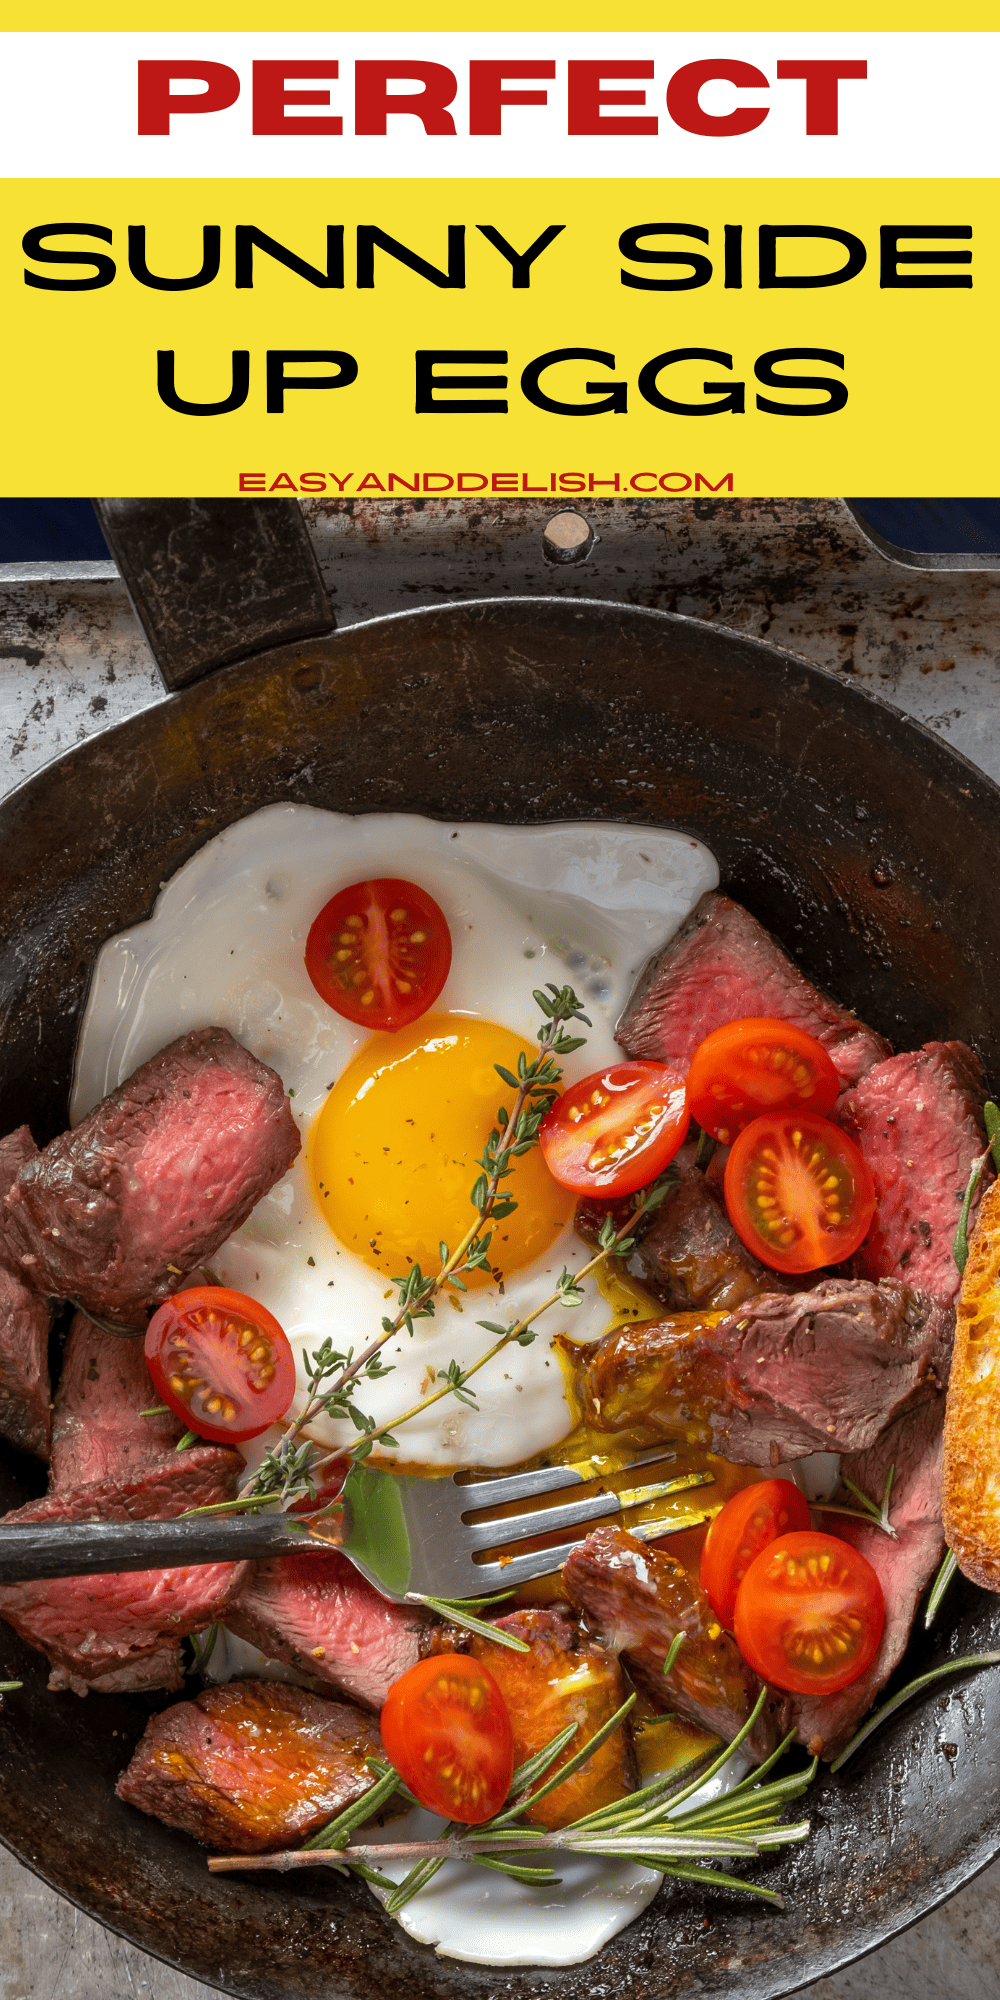 Steak and sunny side up eggs with vegetables in a skillet.